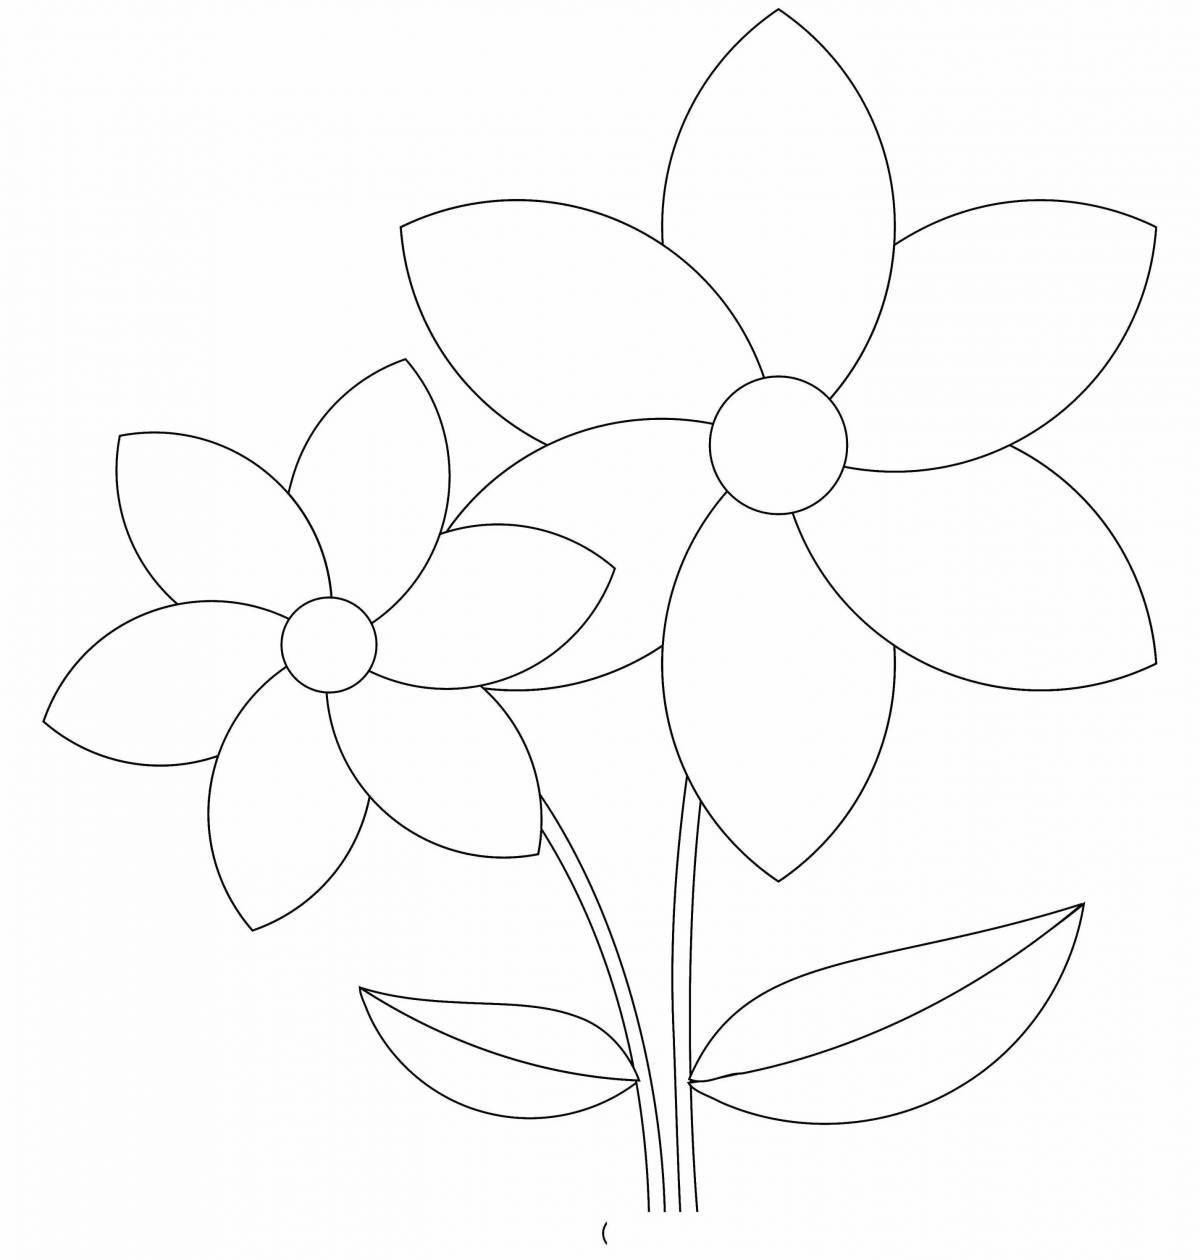 Amazing flower coloring book for 4-5 year olds